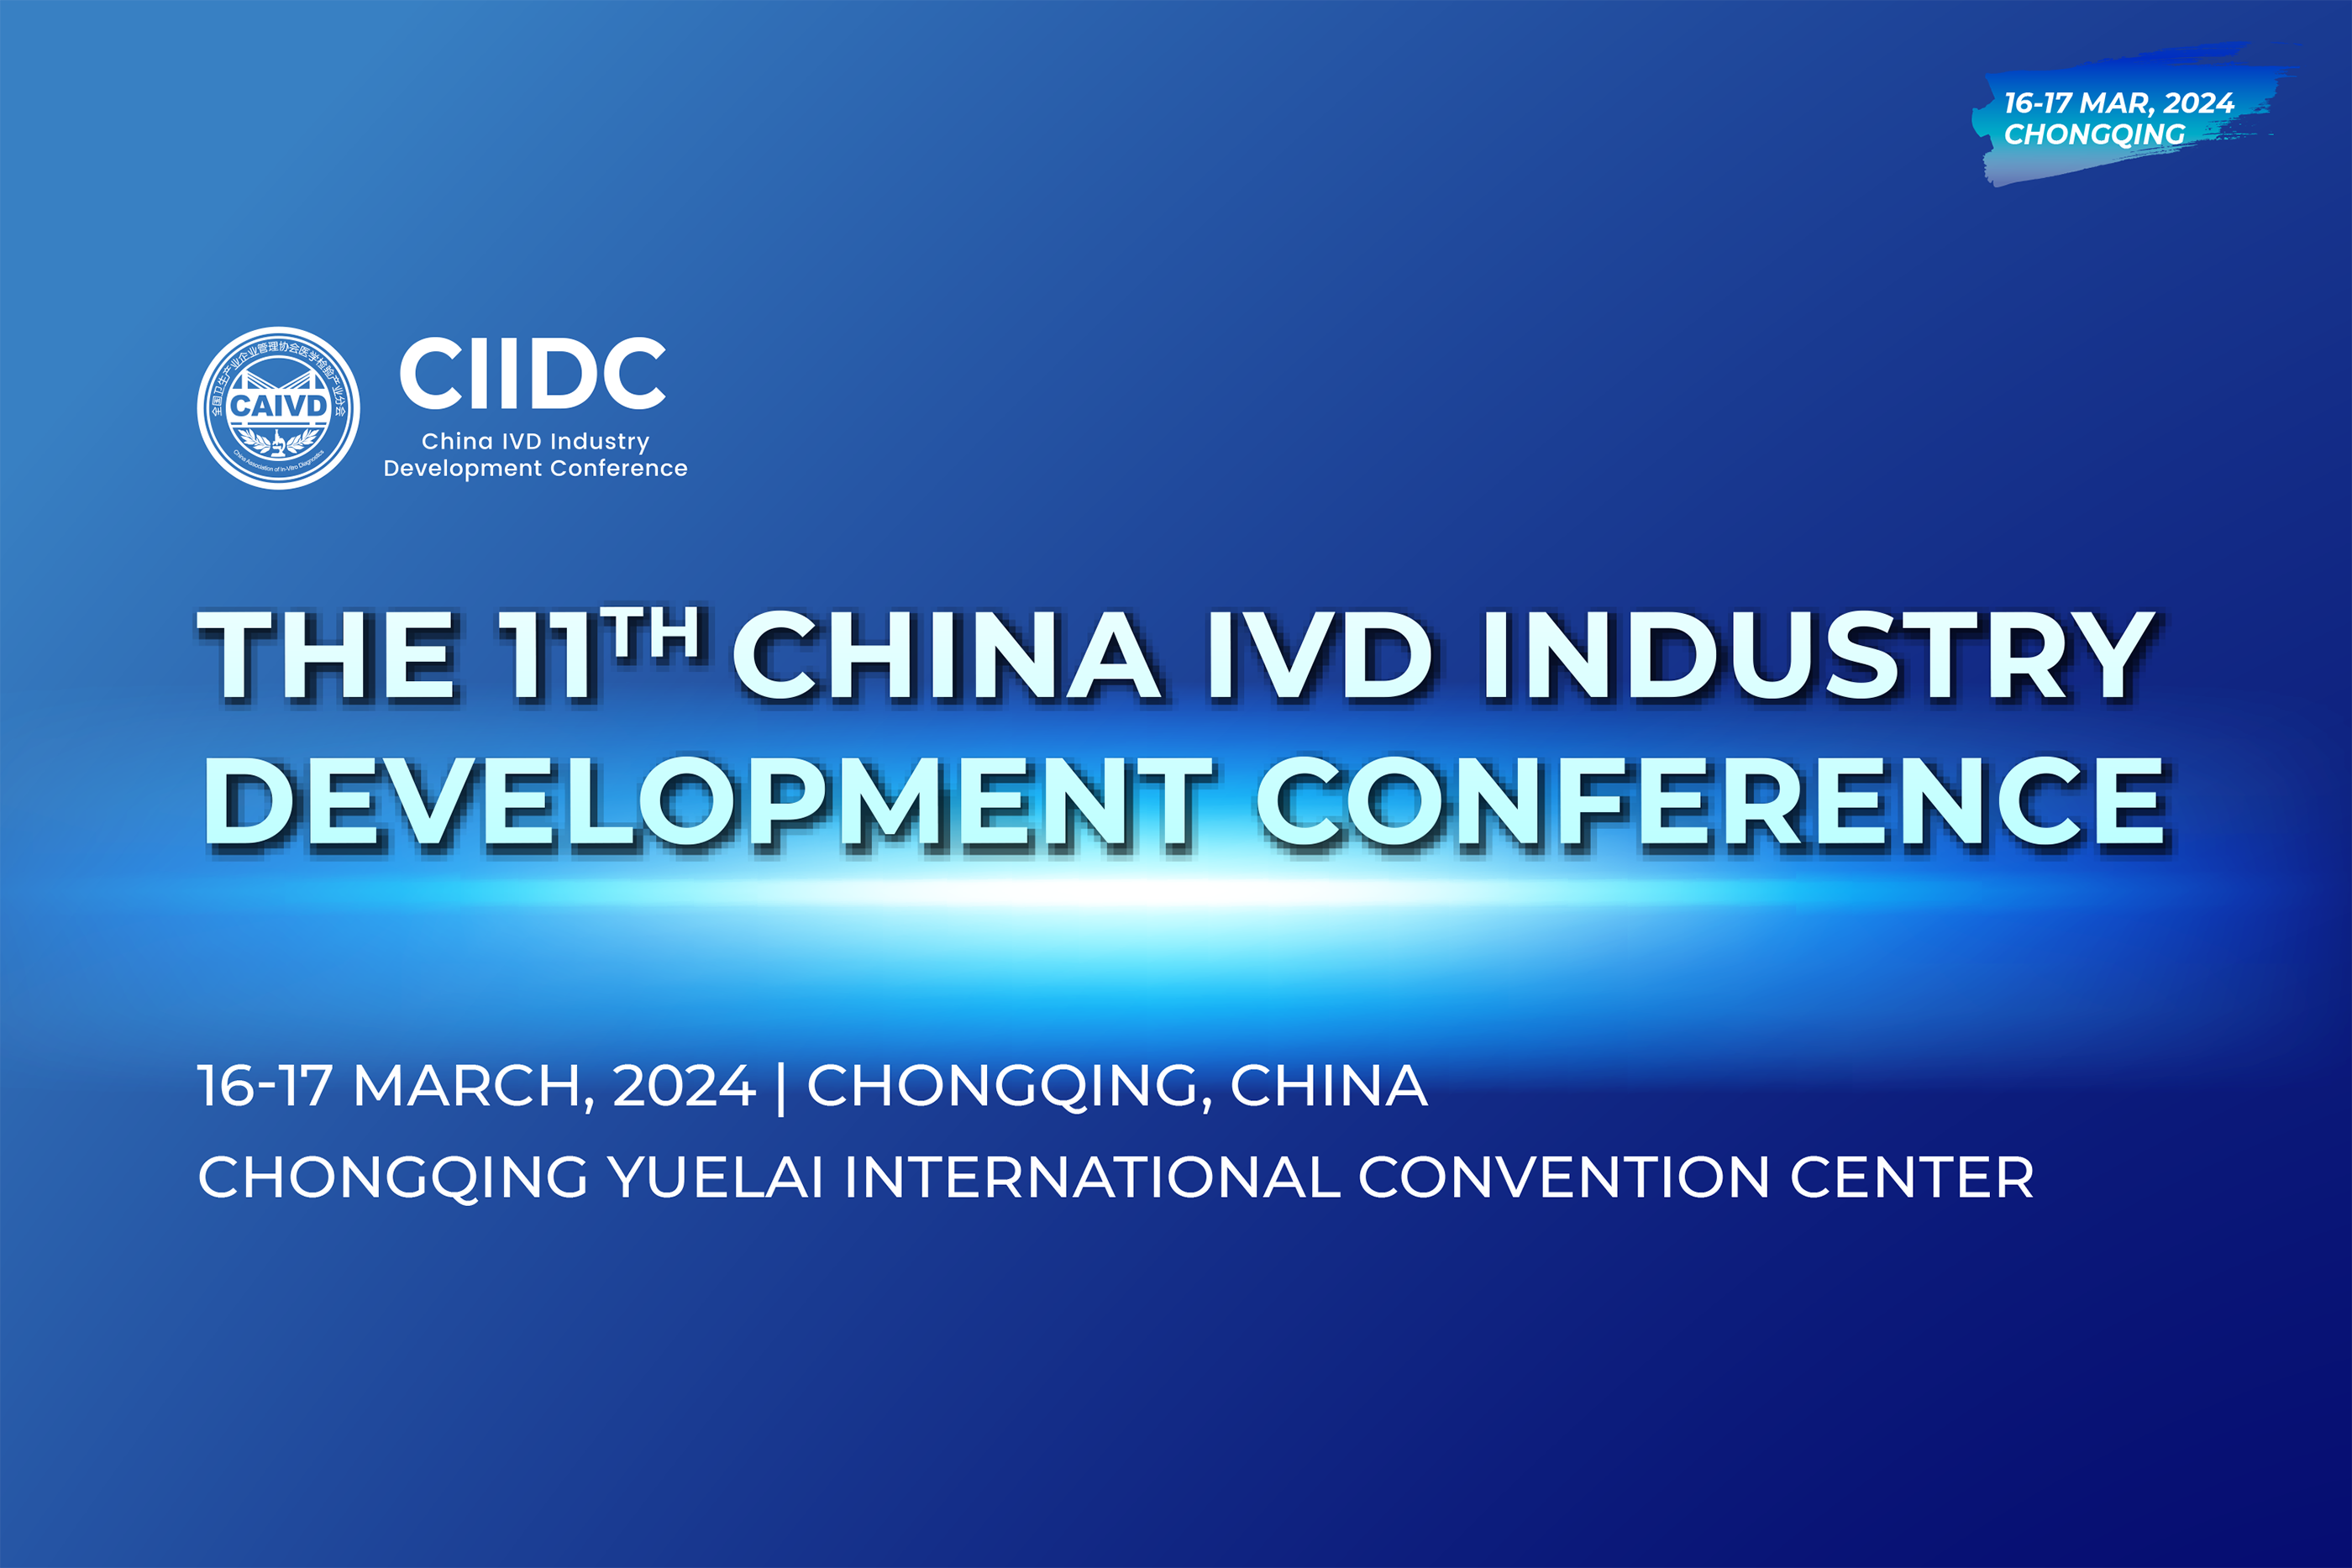 The 11th China IVD Industry Development Conference is scheduled on 16-17 March in Chongqing